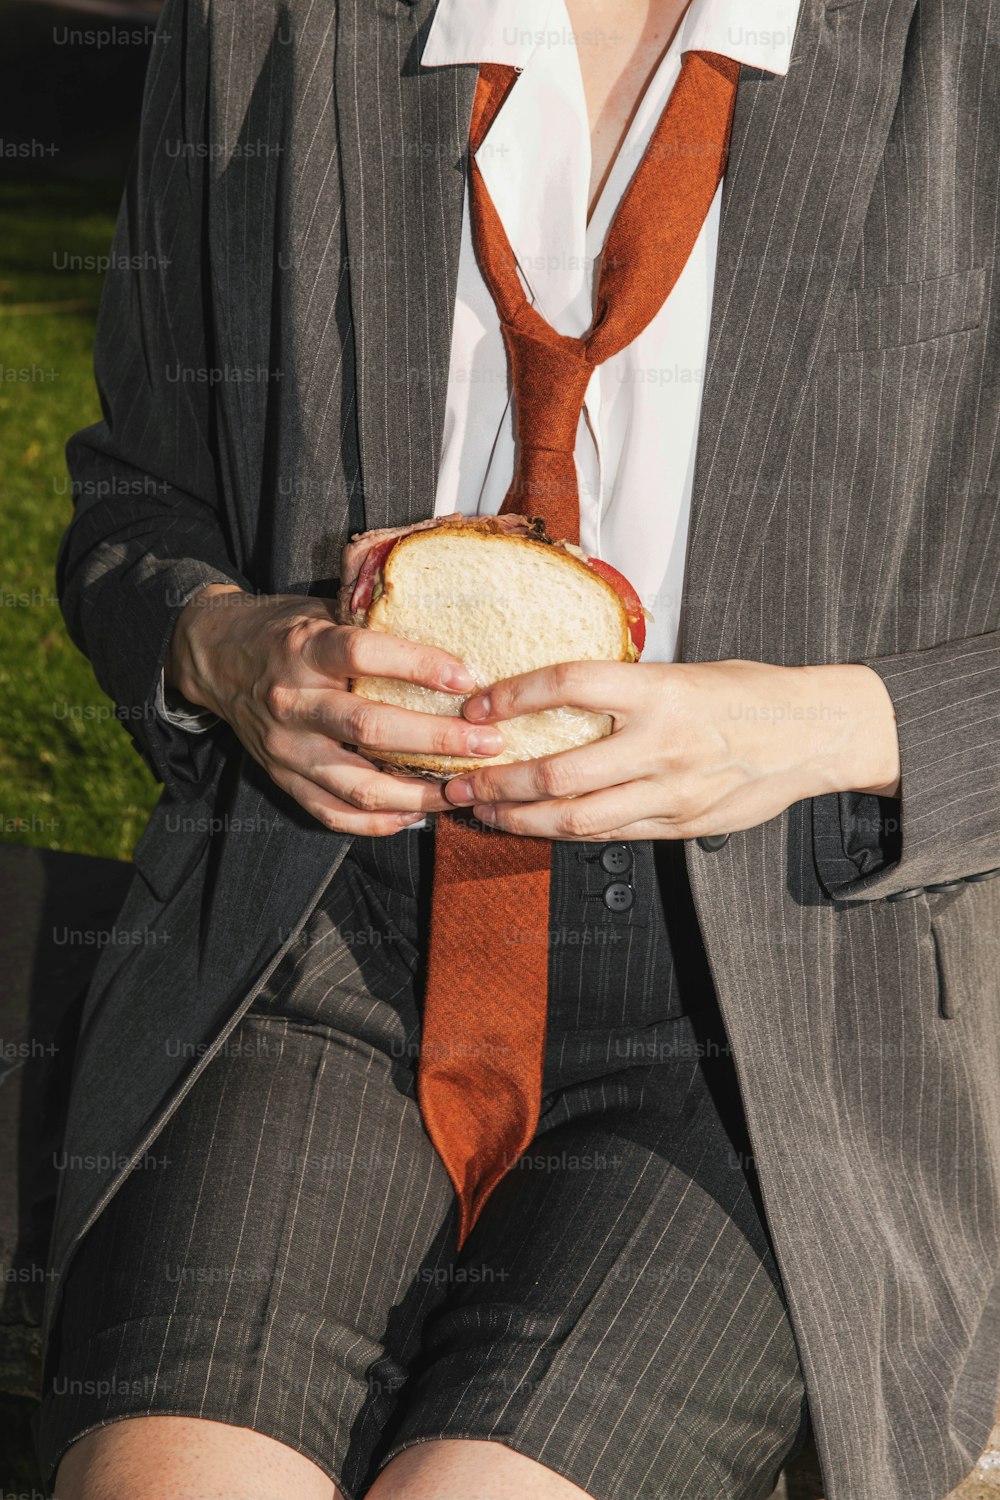 a woman in a suit and tie holding a sandwich